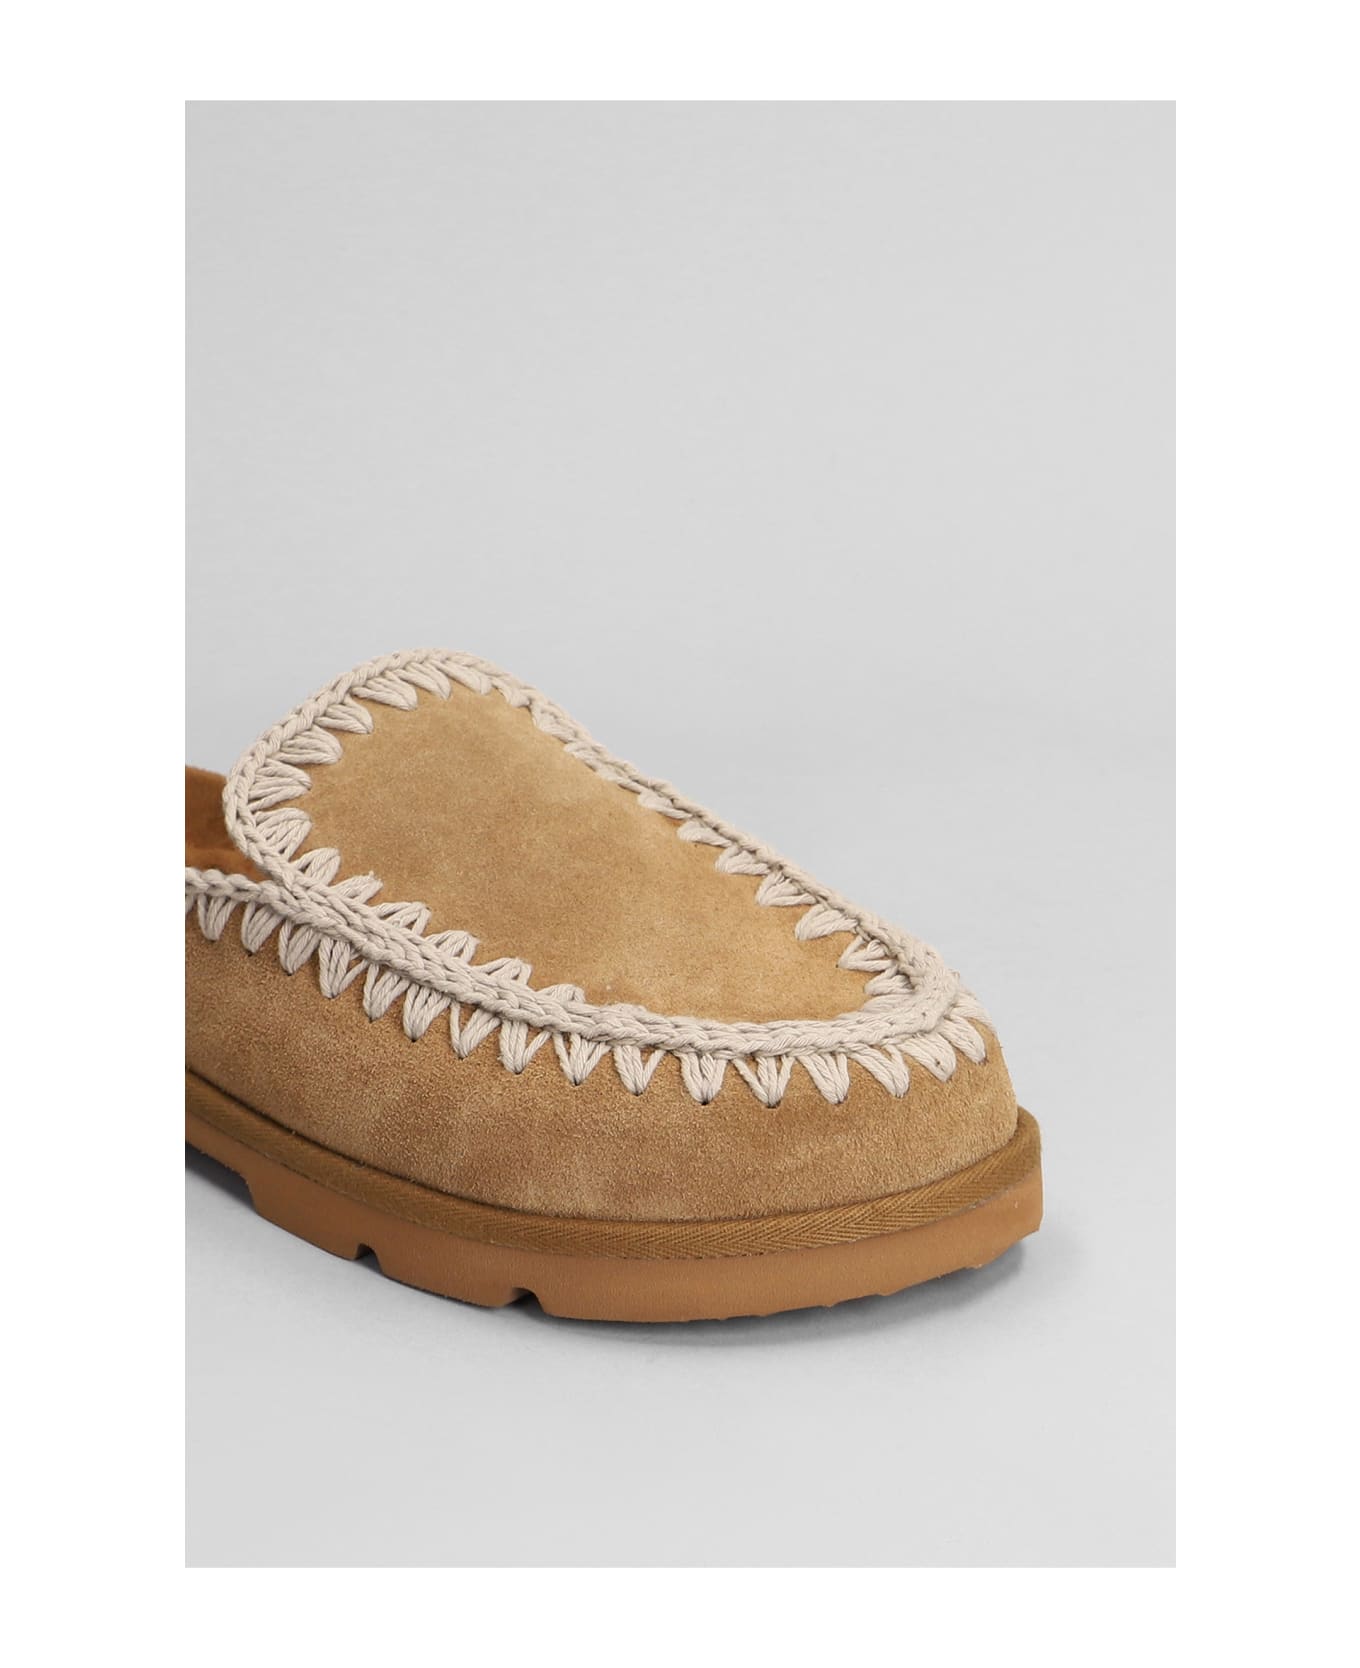 Mou Low Bio Sabot Slipper-mule In Leather Color Suede - leather color